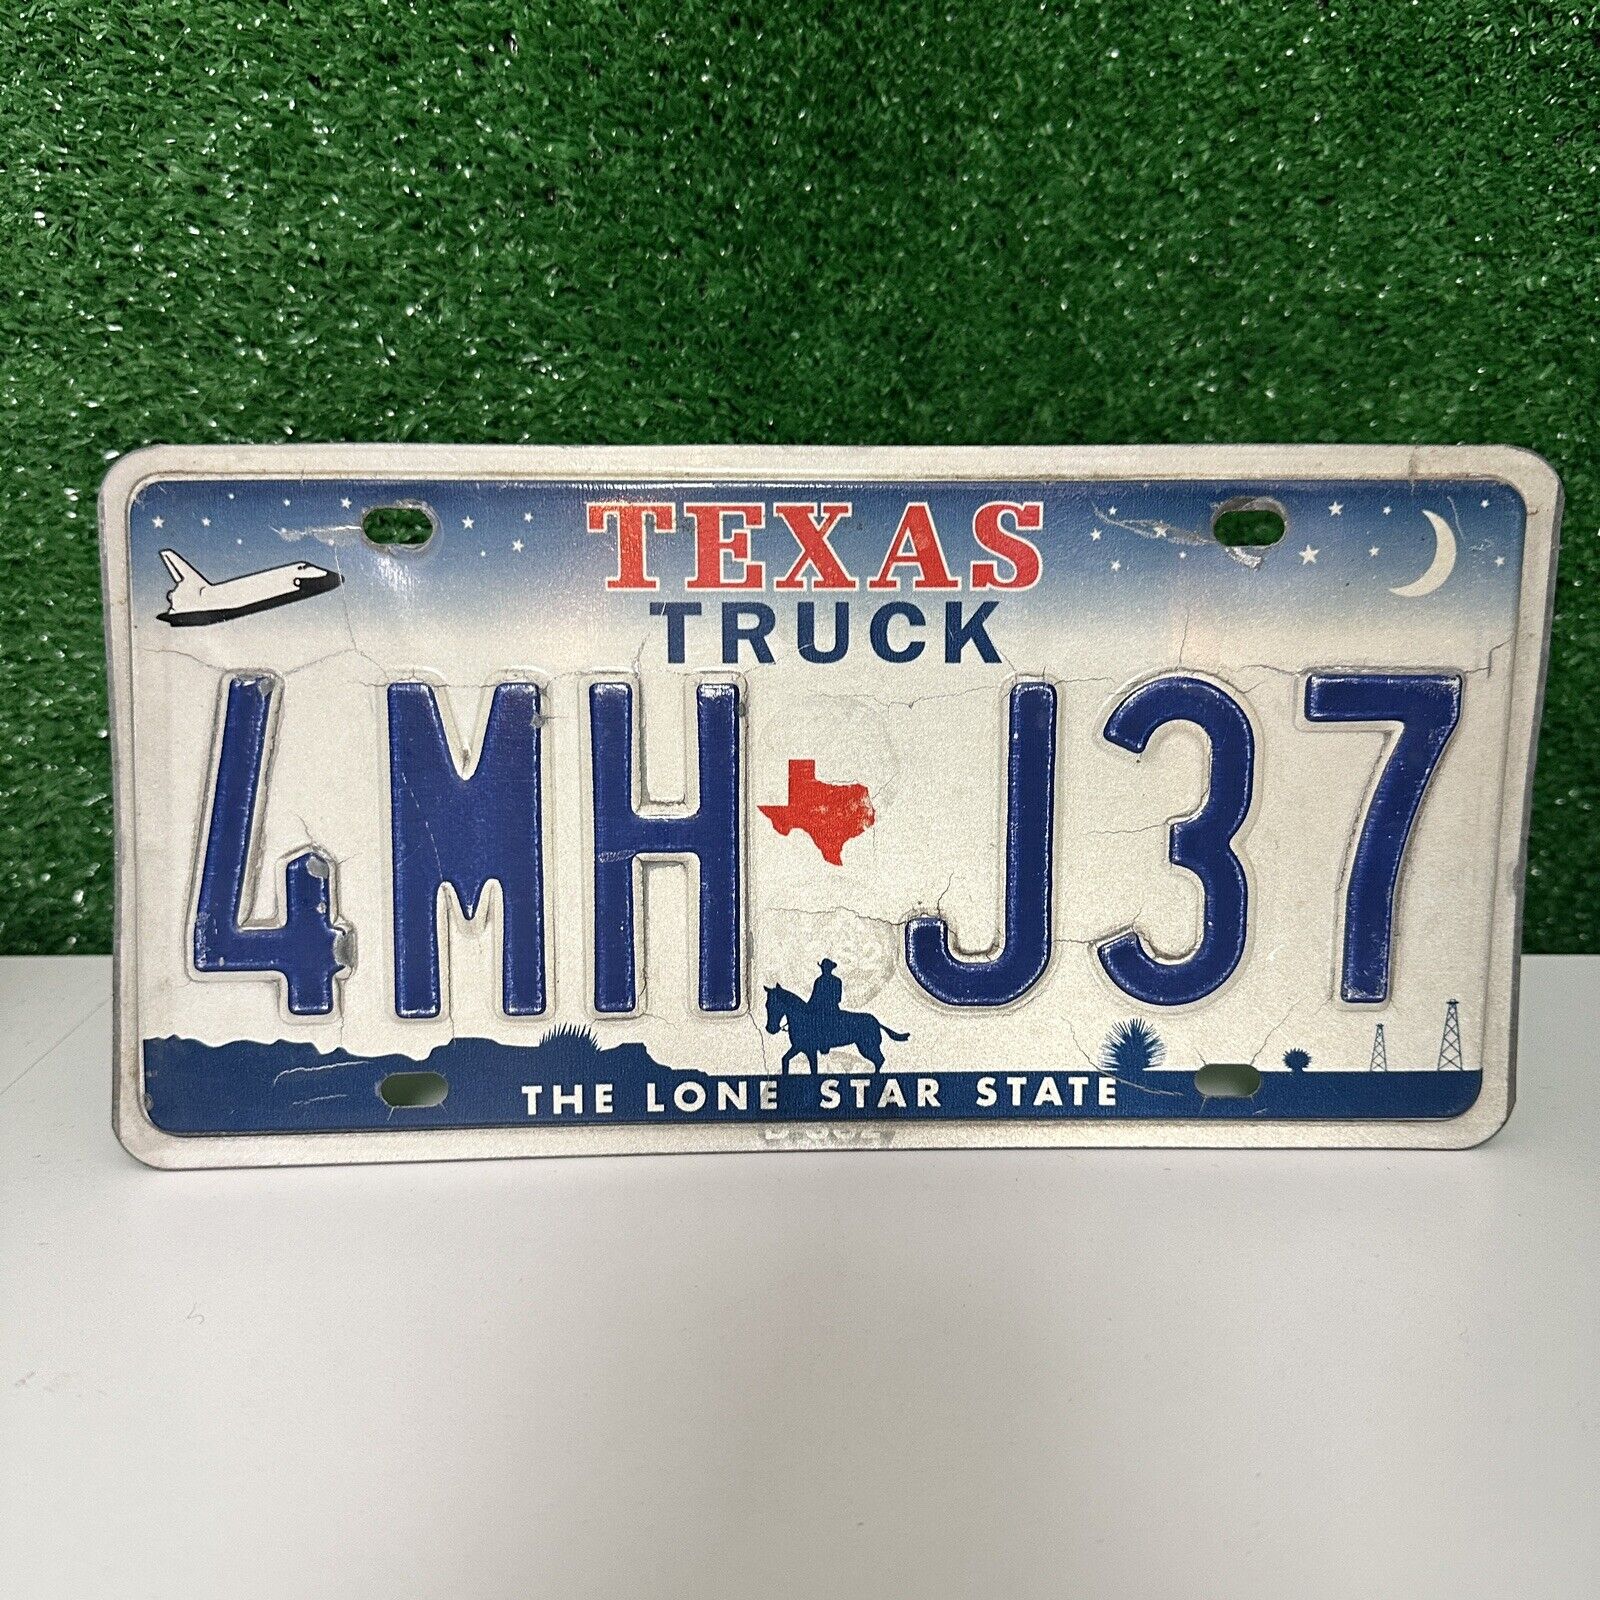 Vintage  Texas Truck License Plate Embossed 4MHJ37 The Lone Star State Panoramic